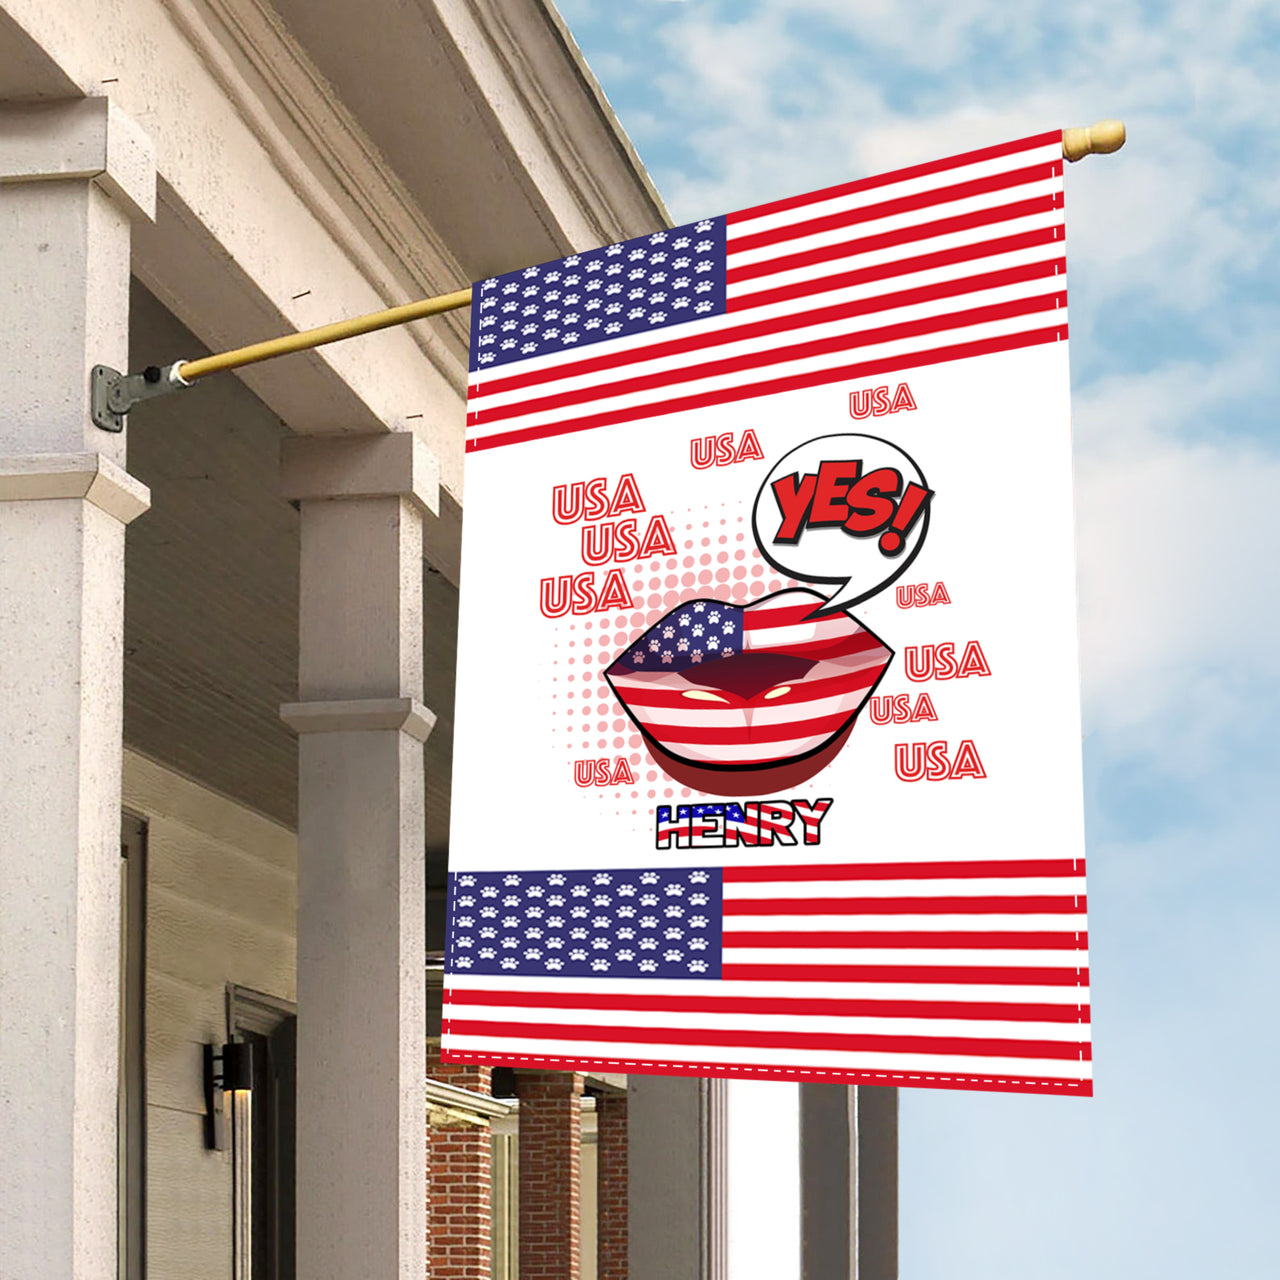 Personalized Dog Flag Gift Idea - Say Yes To America For Dog Lovers - Garden Flag